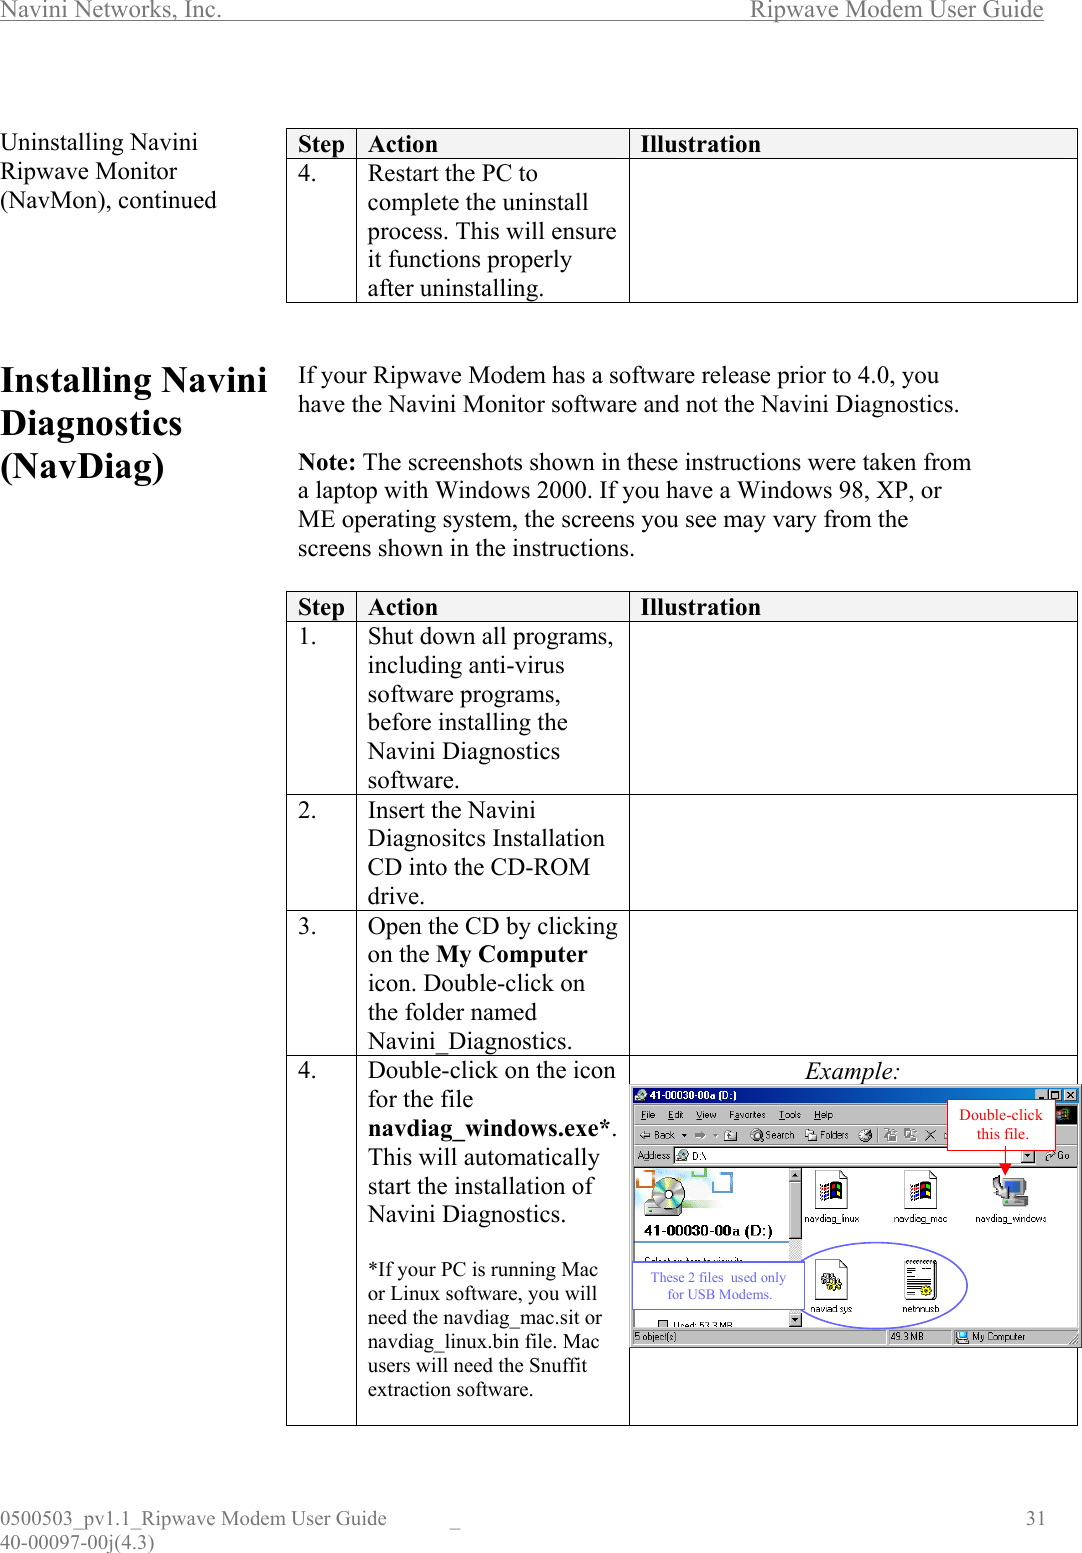 Navini Networks, Inc.        Ripwave Modem User Guide 0500503_pv1.1_Ripwave Modem User Guide  _                                    31 40-00097-00j(4.3)  Uninstalling Navini Ripwave Monitor (NavMon), continued      Installing Navini Diagnostics (NavDiag)                                   Step  Action  Illustration 4.  Restart the PC to complete the uninstall process. This will ensure it functions properly after uninstalling.    If your Ripwave Modem has a software release prior to 4.0, you have the Navini Monitor software and not the Navini Diagnostics.   Note: The screenshots shown in these instructions were taken from a laptop with Windows 2000. If you have a Windows 98, XP, or ME operating system, the screens you see may vary from the screens shown in the instructions.  Step  Action  Illustration 1.  Shut down all programs, including anti-virus software programs, before installing the Navini Diagnostics software.  2.  Insert the Navini Diagnositcs Installation CD into the CD-ROM drive.  3.  Open the CD by clicking on the My Computer icon. Double-click on the folder named Navini_Diagnostics.  4.  Double-click on the icon for the file navdiag_windows.exe*. This will automatically start the installation of Navini Diagnostics.  *If your PC is running Mac or Linux software, you will need the navdiag_mac.sit or navdiag_linux.bin file. Mac users will need the Snuffit extraction software.  Example:  Double-clickthis file.These 2 files  used onlyfor USB Modems.Double-clickthis file.These 2 files  used onlyfor USB Modems.